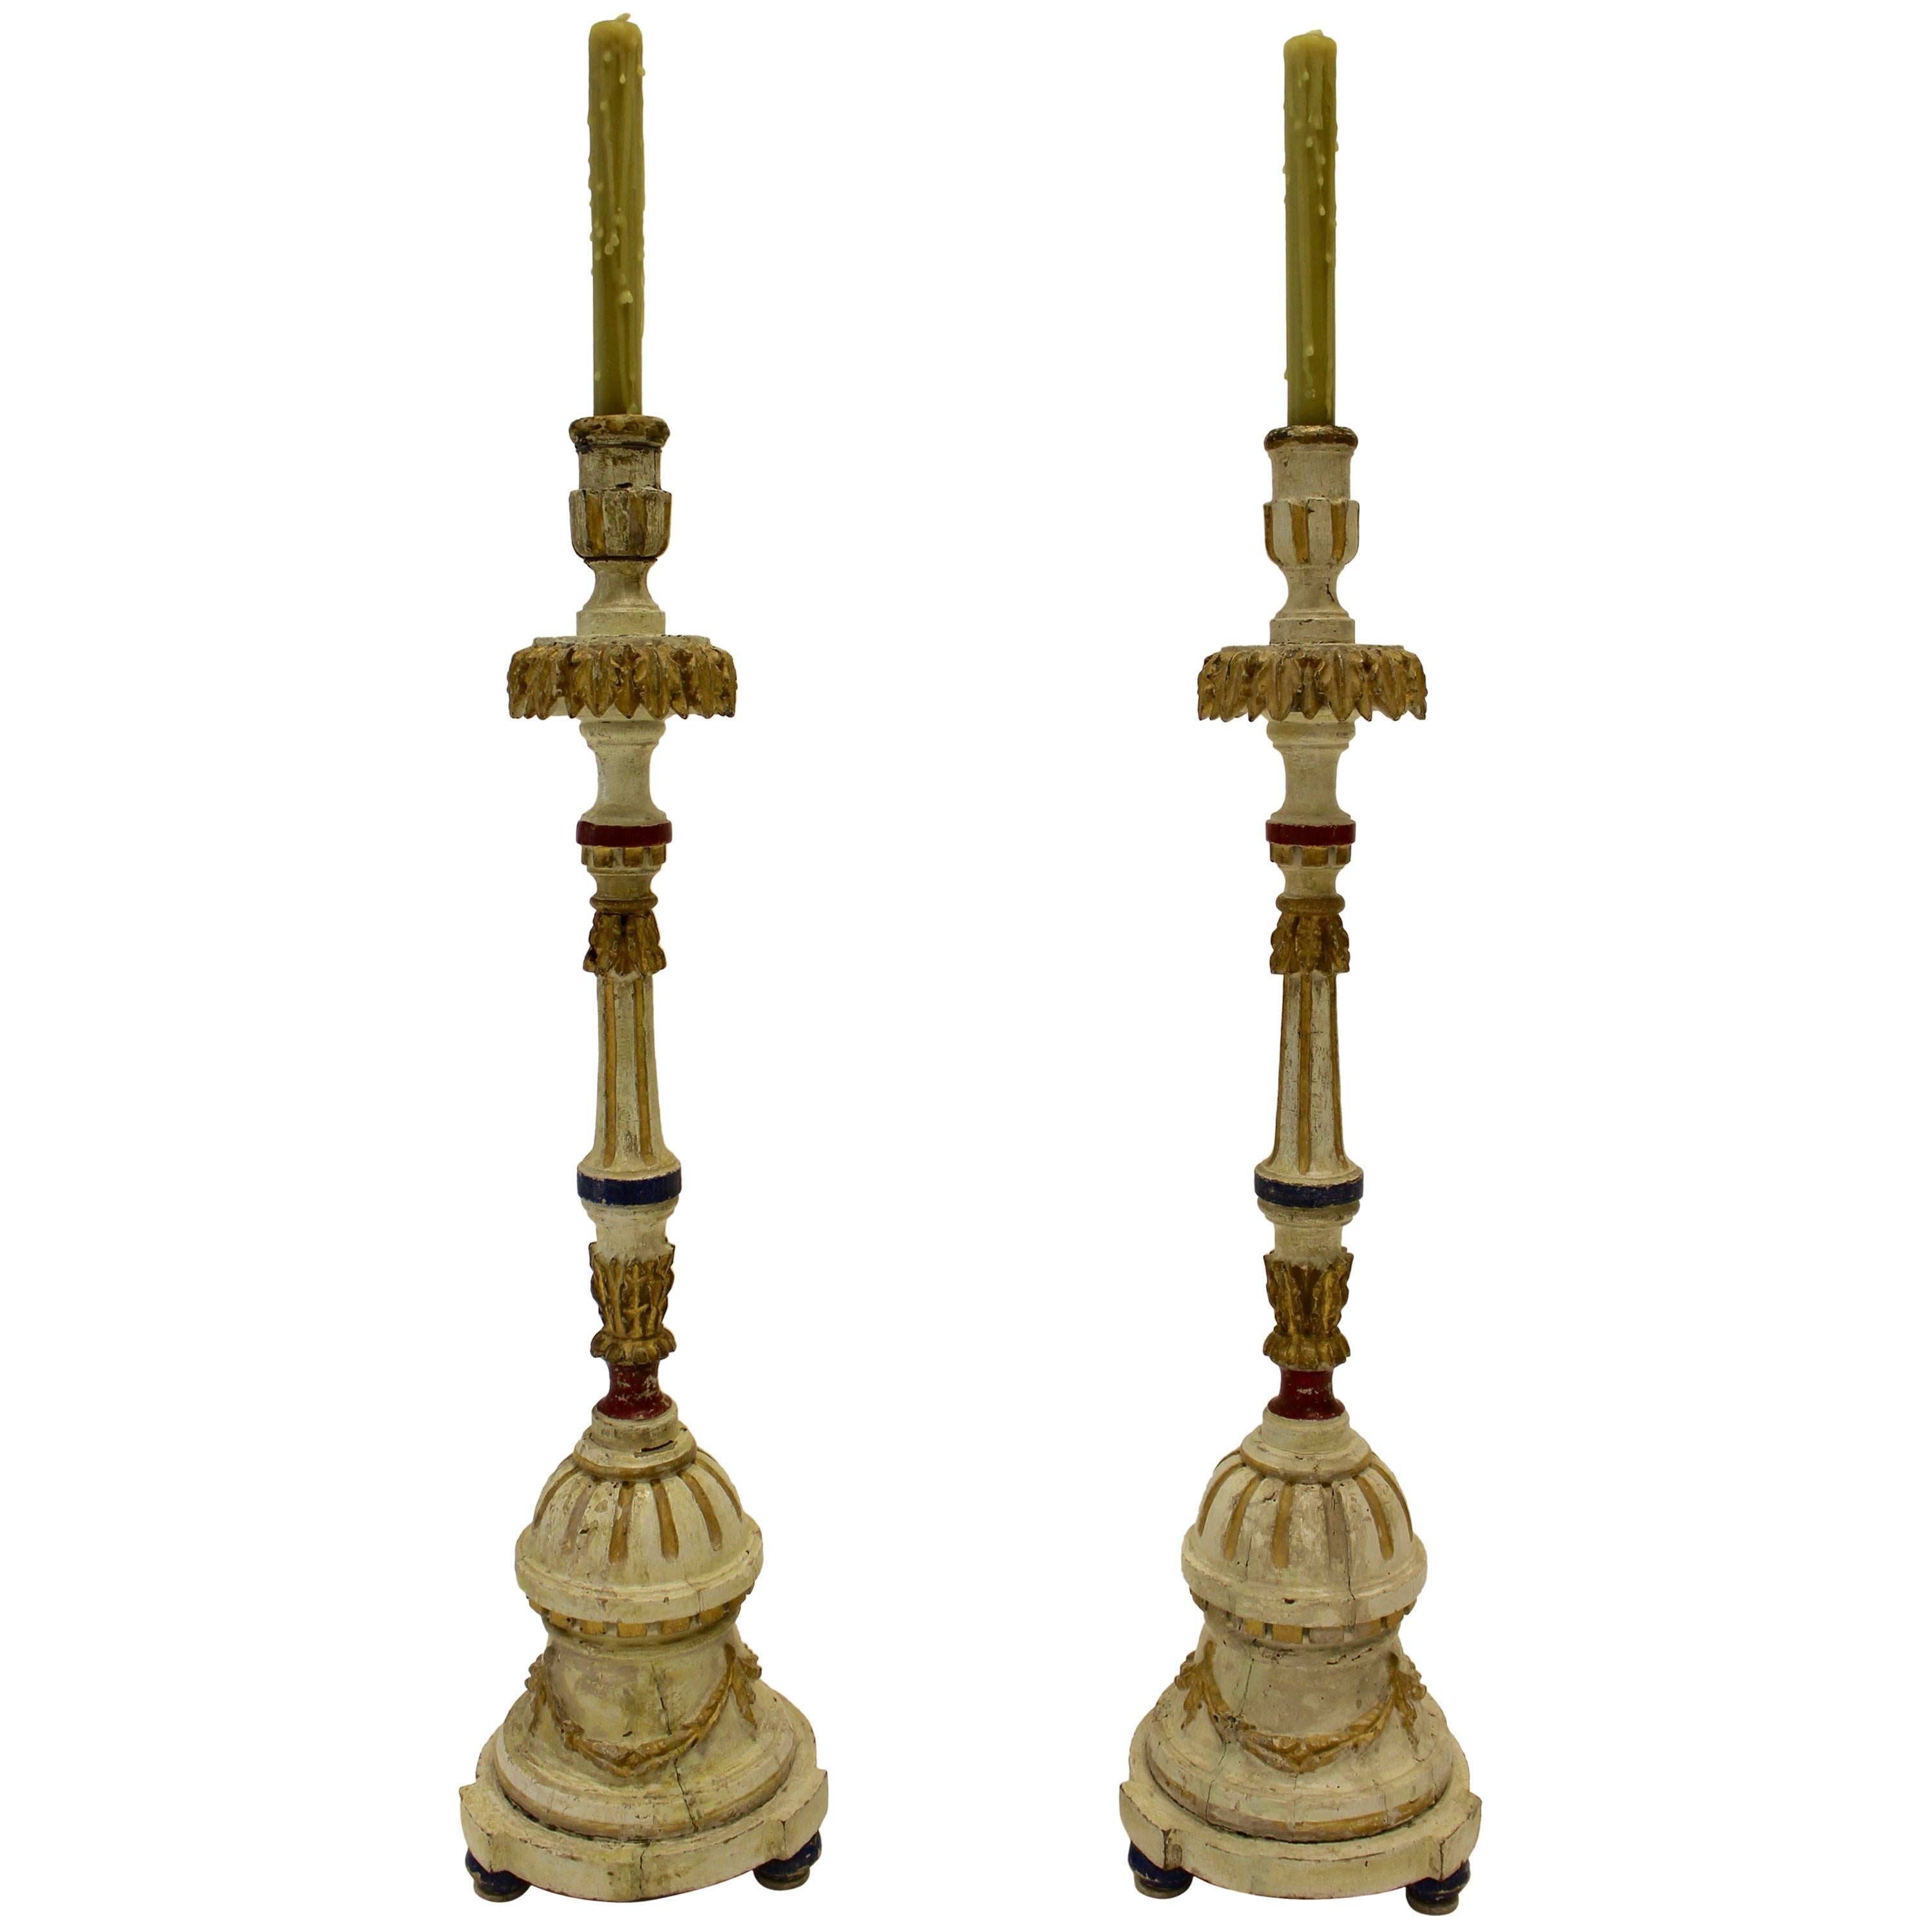 Pair of 19th Century Italian Cream and Polychrome Decorated Pricket Candlesticks For Sale